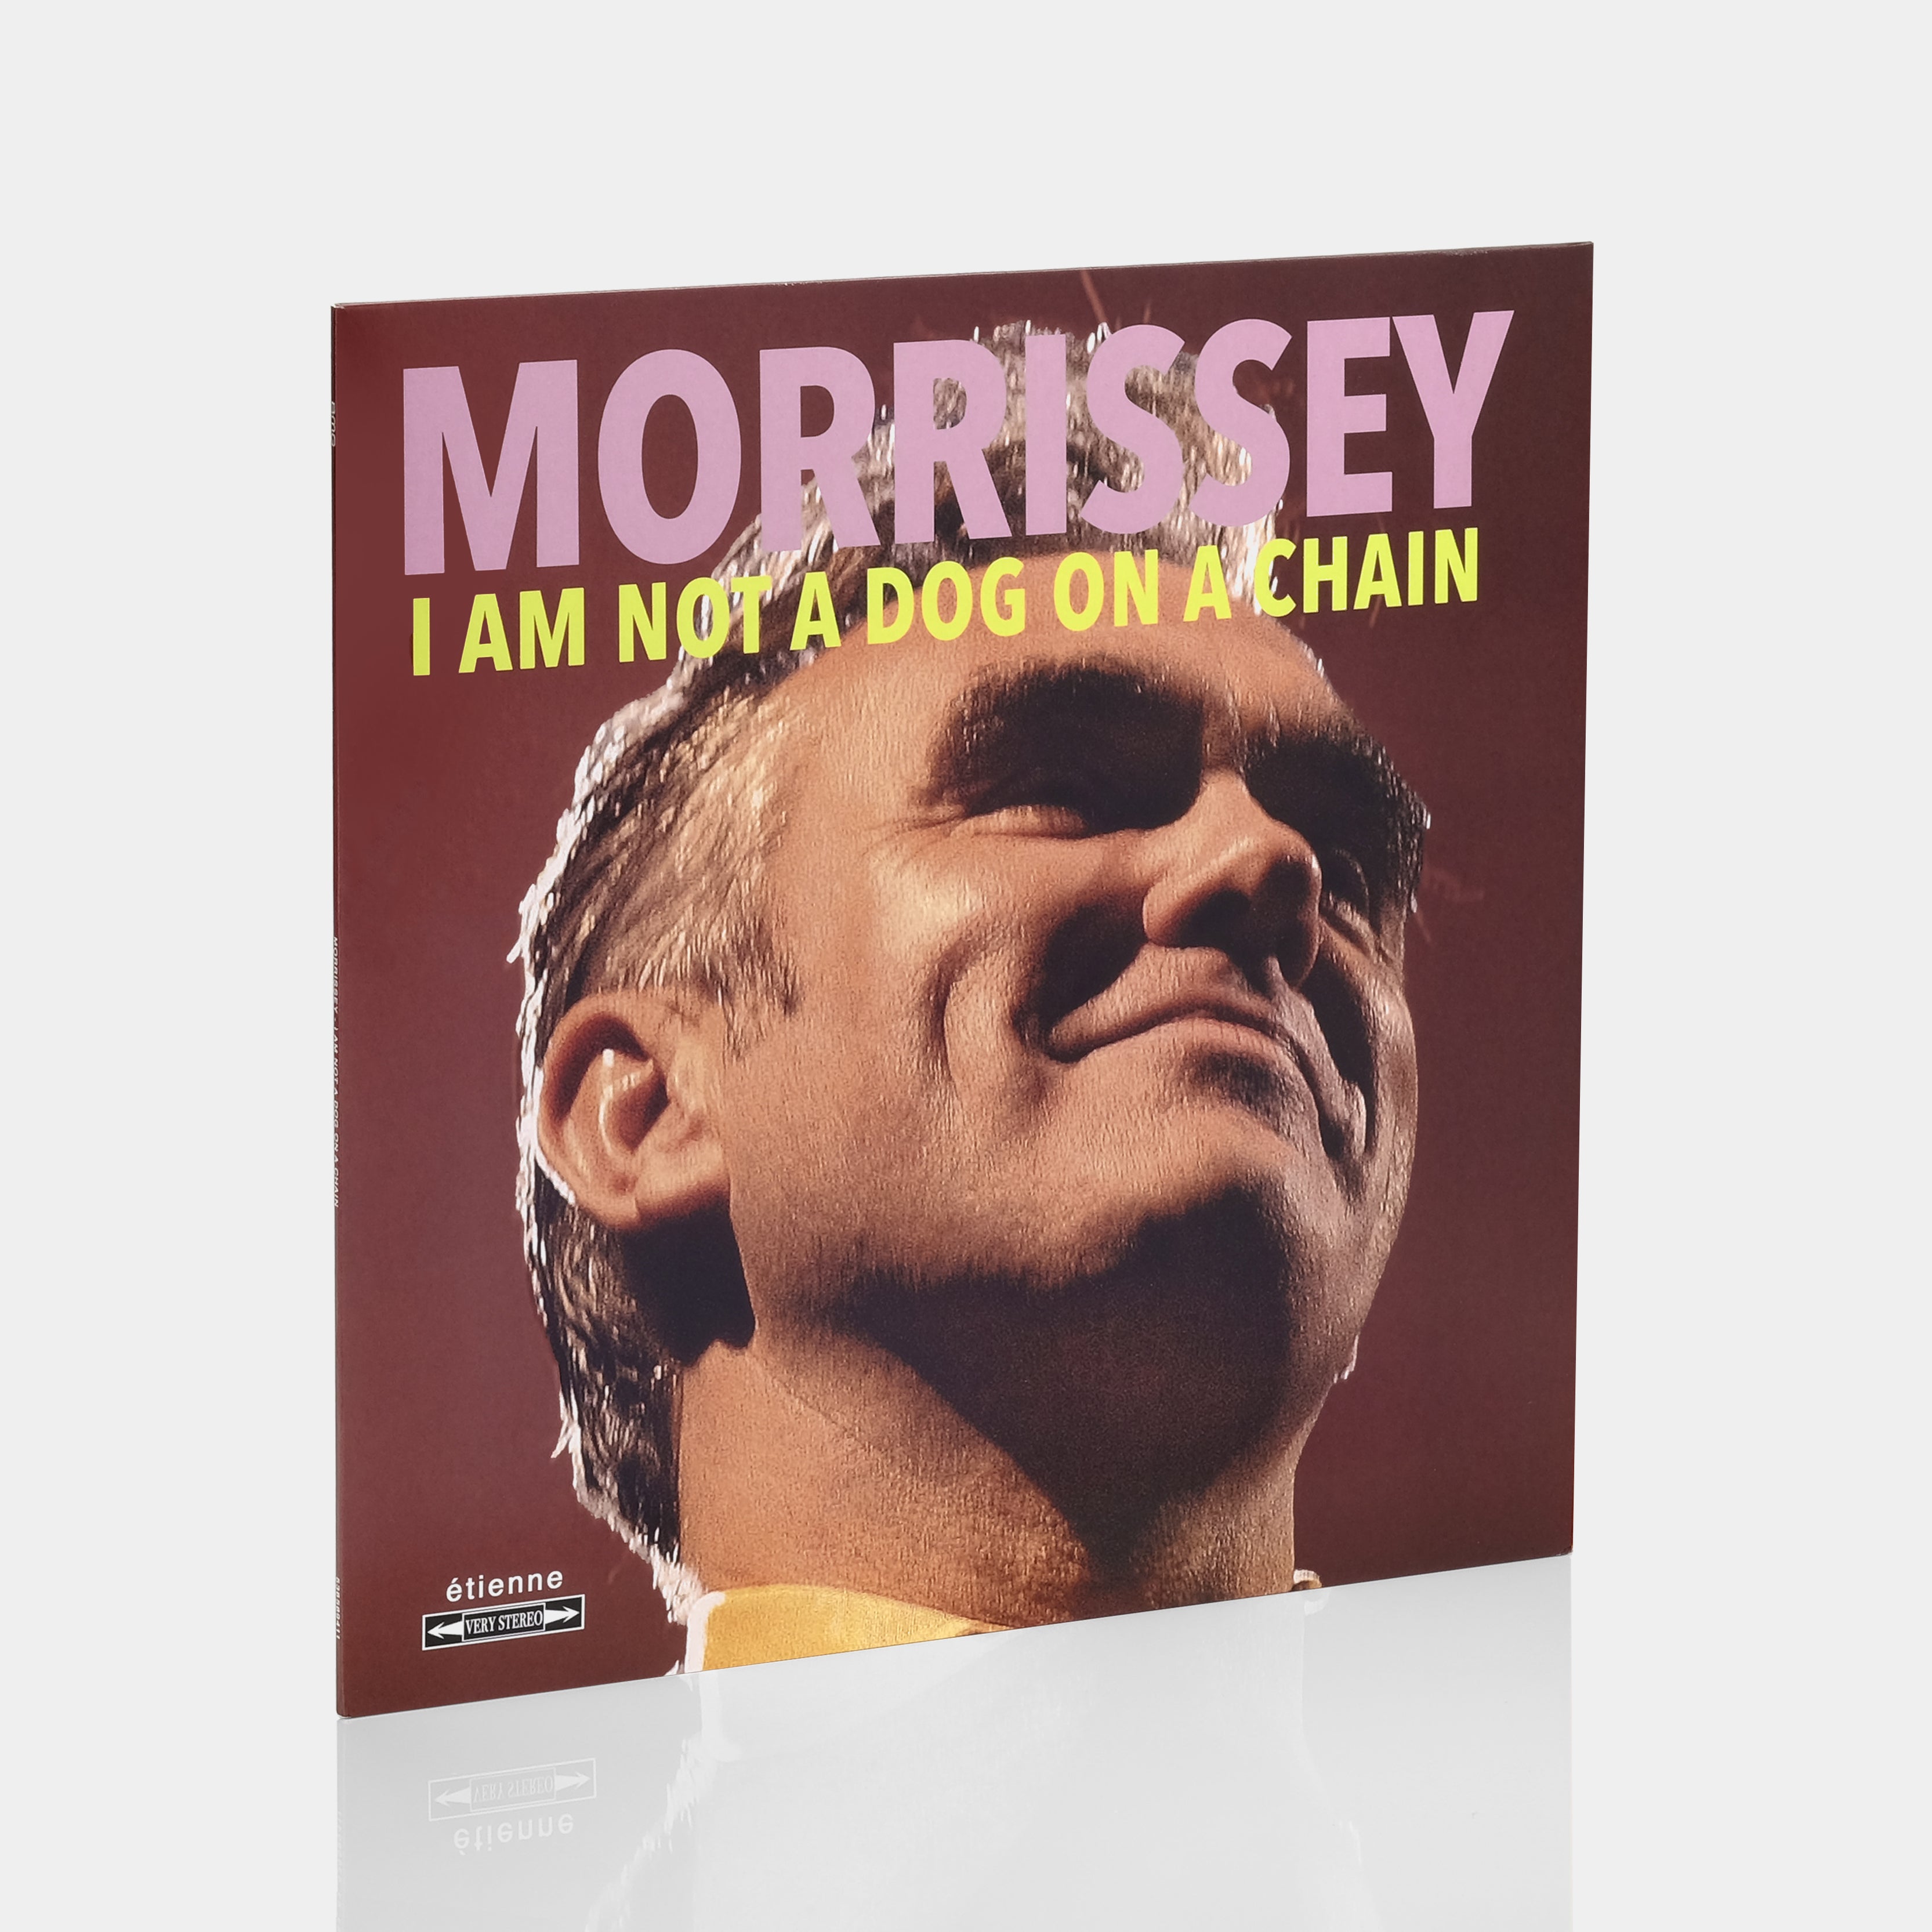 Morrissey - I Am Not a Dog on a Chain LP Red Vinyl Record